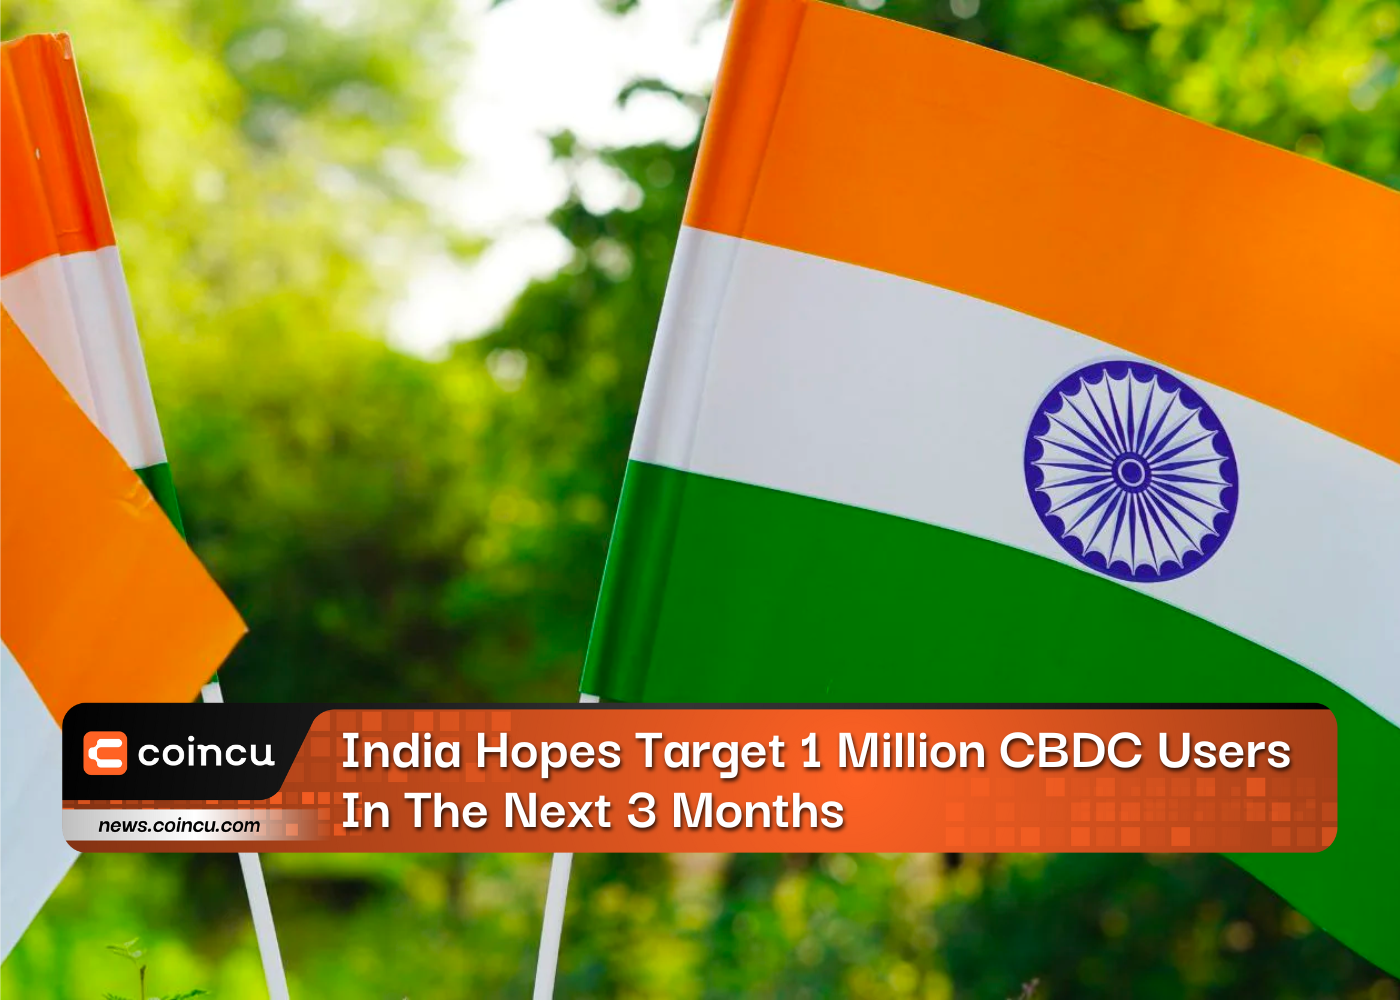 India Hopes To Target 1 Million CBDC Users In The Next 3 Months